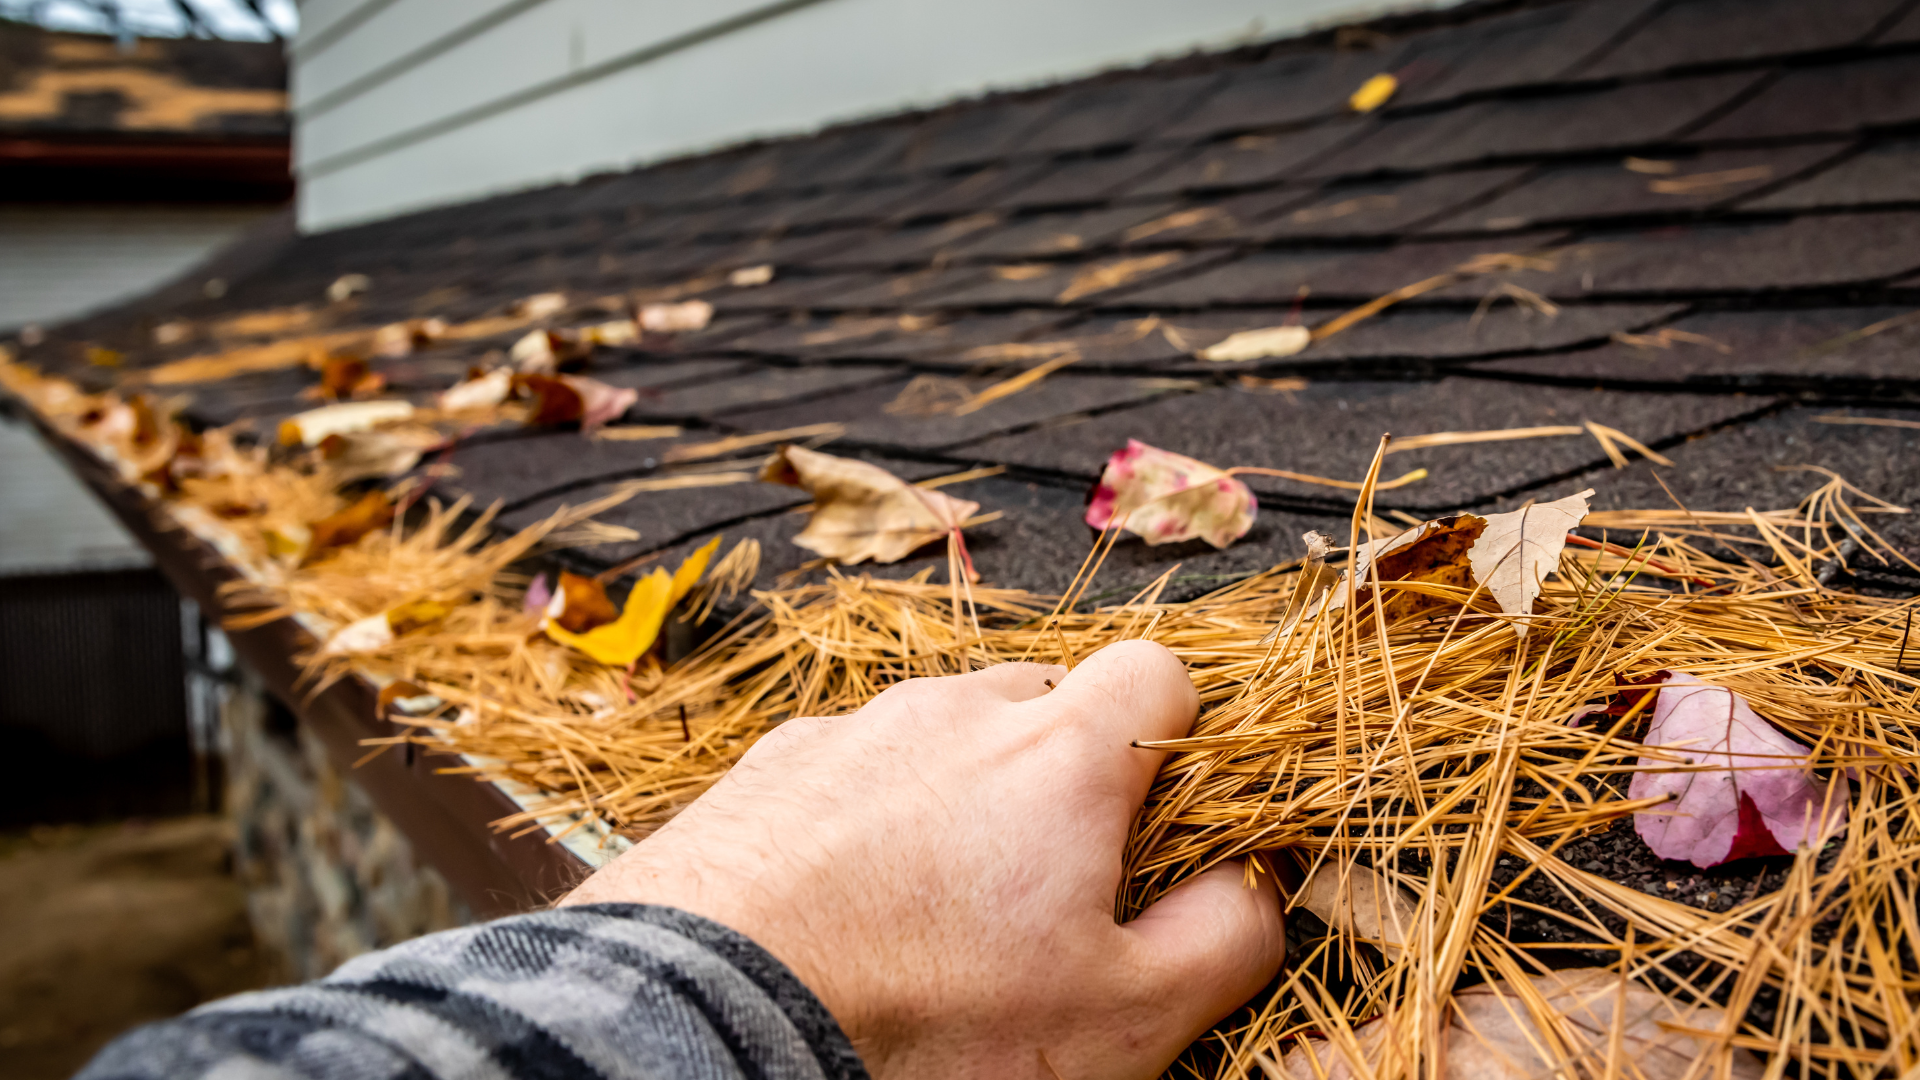 A person removing debris from a roof in the fall